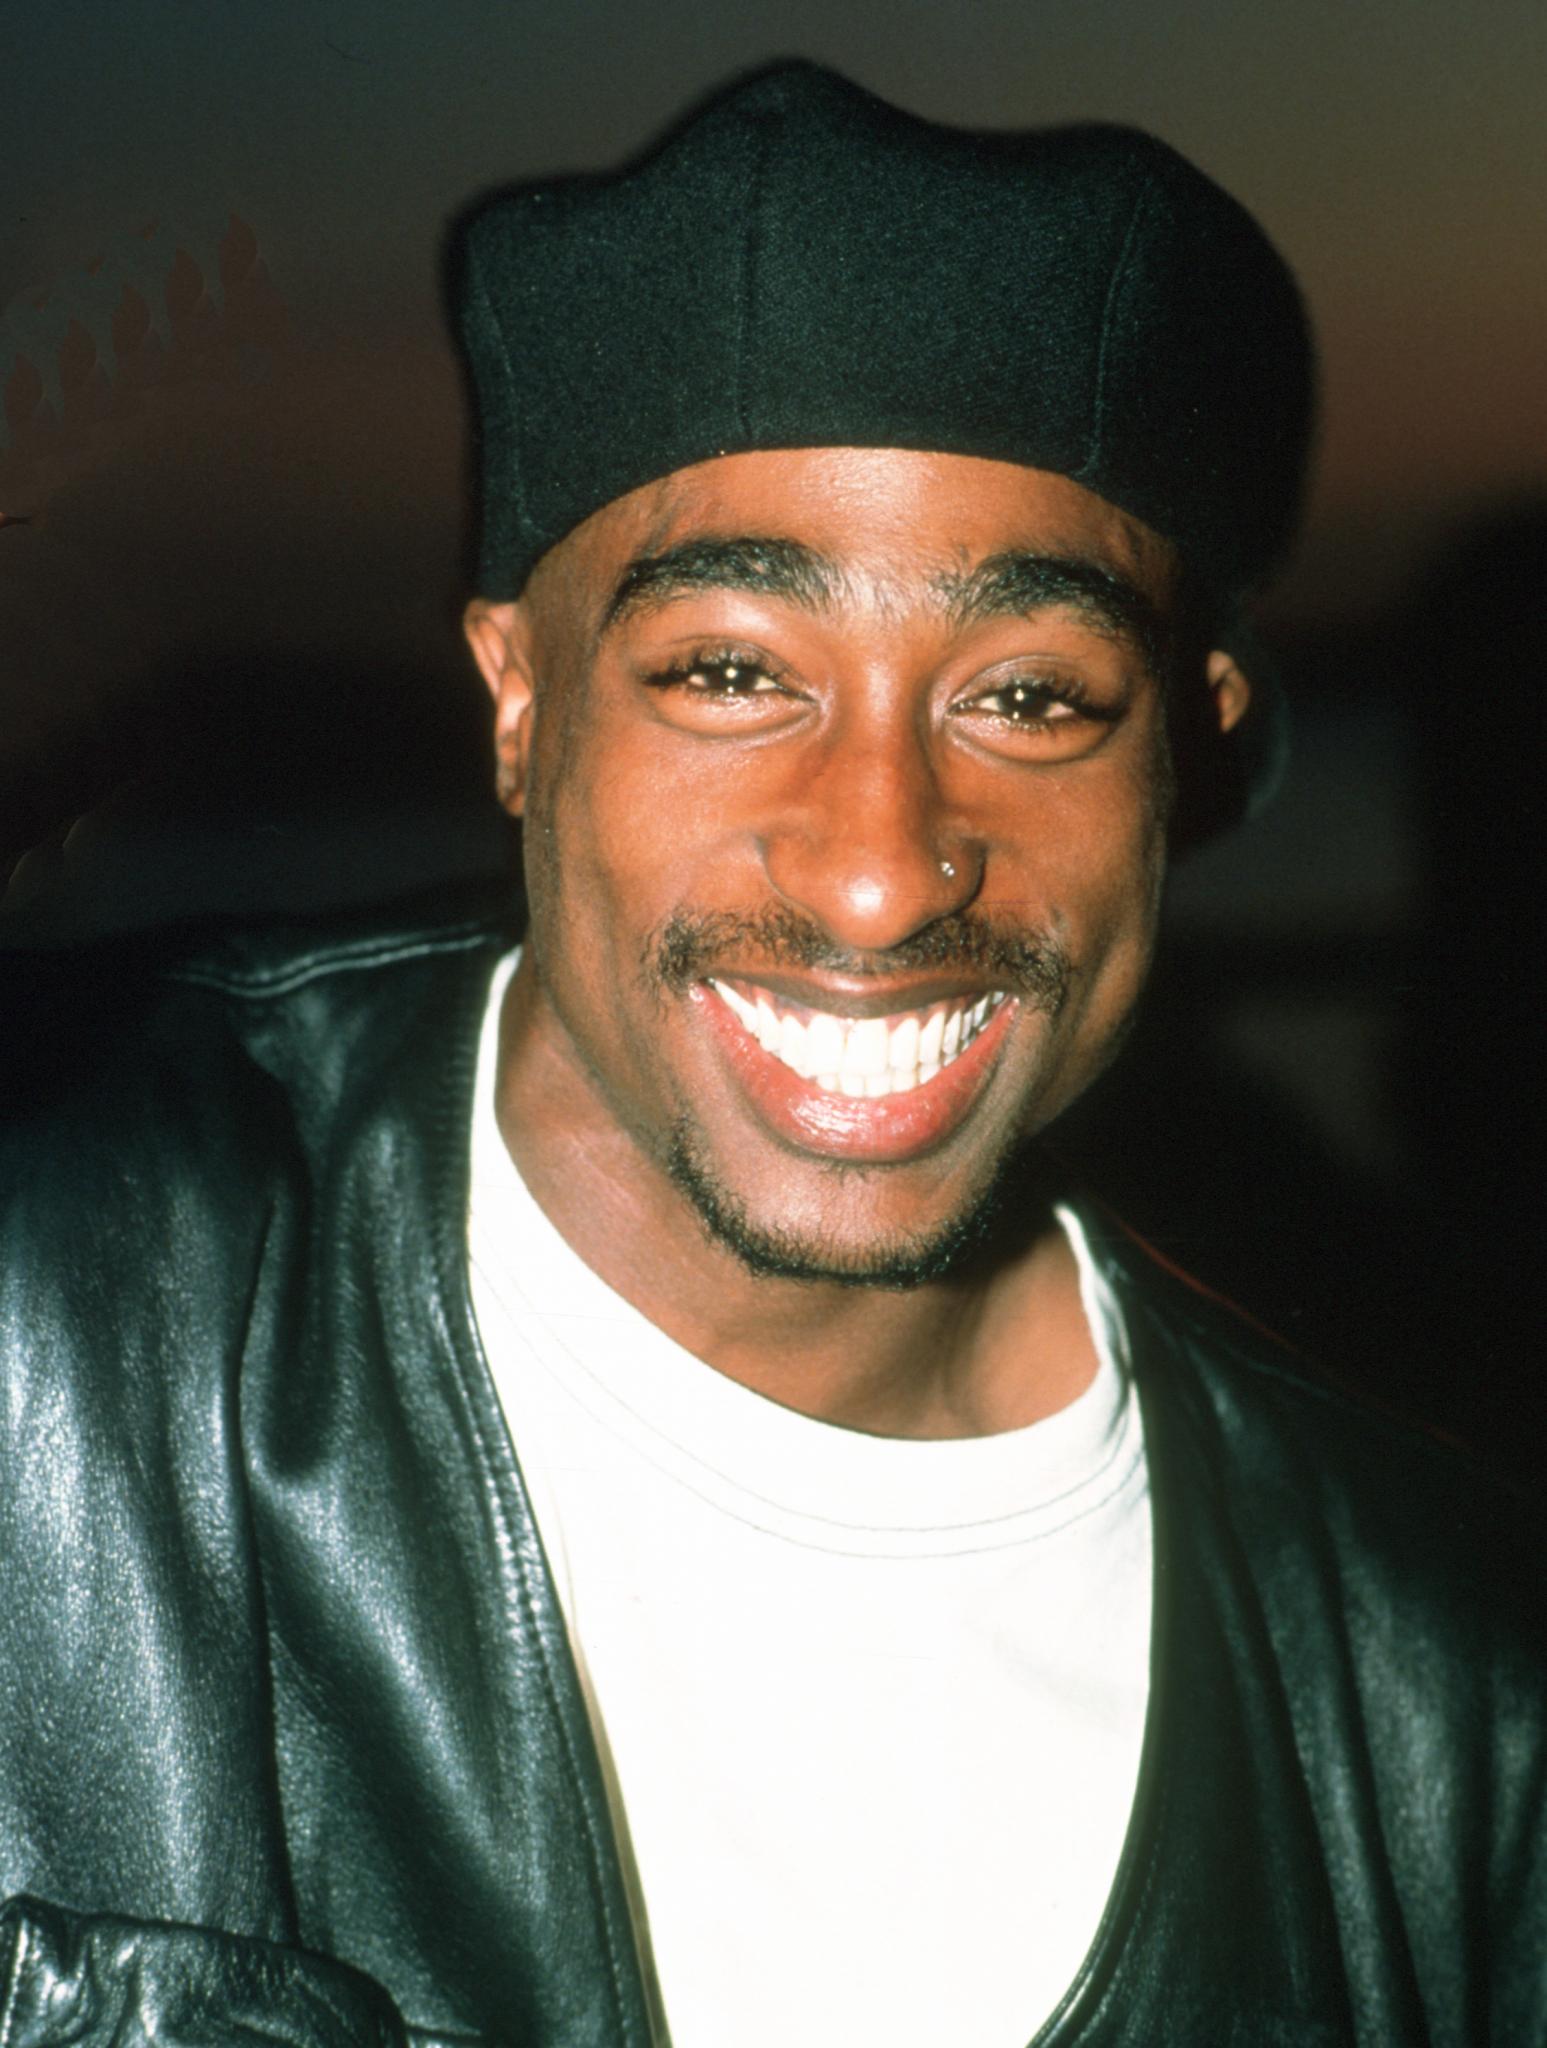 Tupac Shakur To Be Inducted Into Rock And Roll Hall Of Fame
